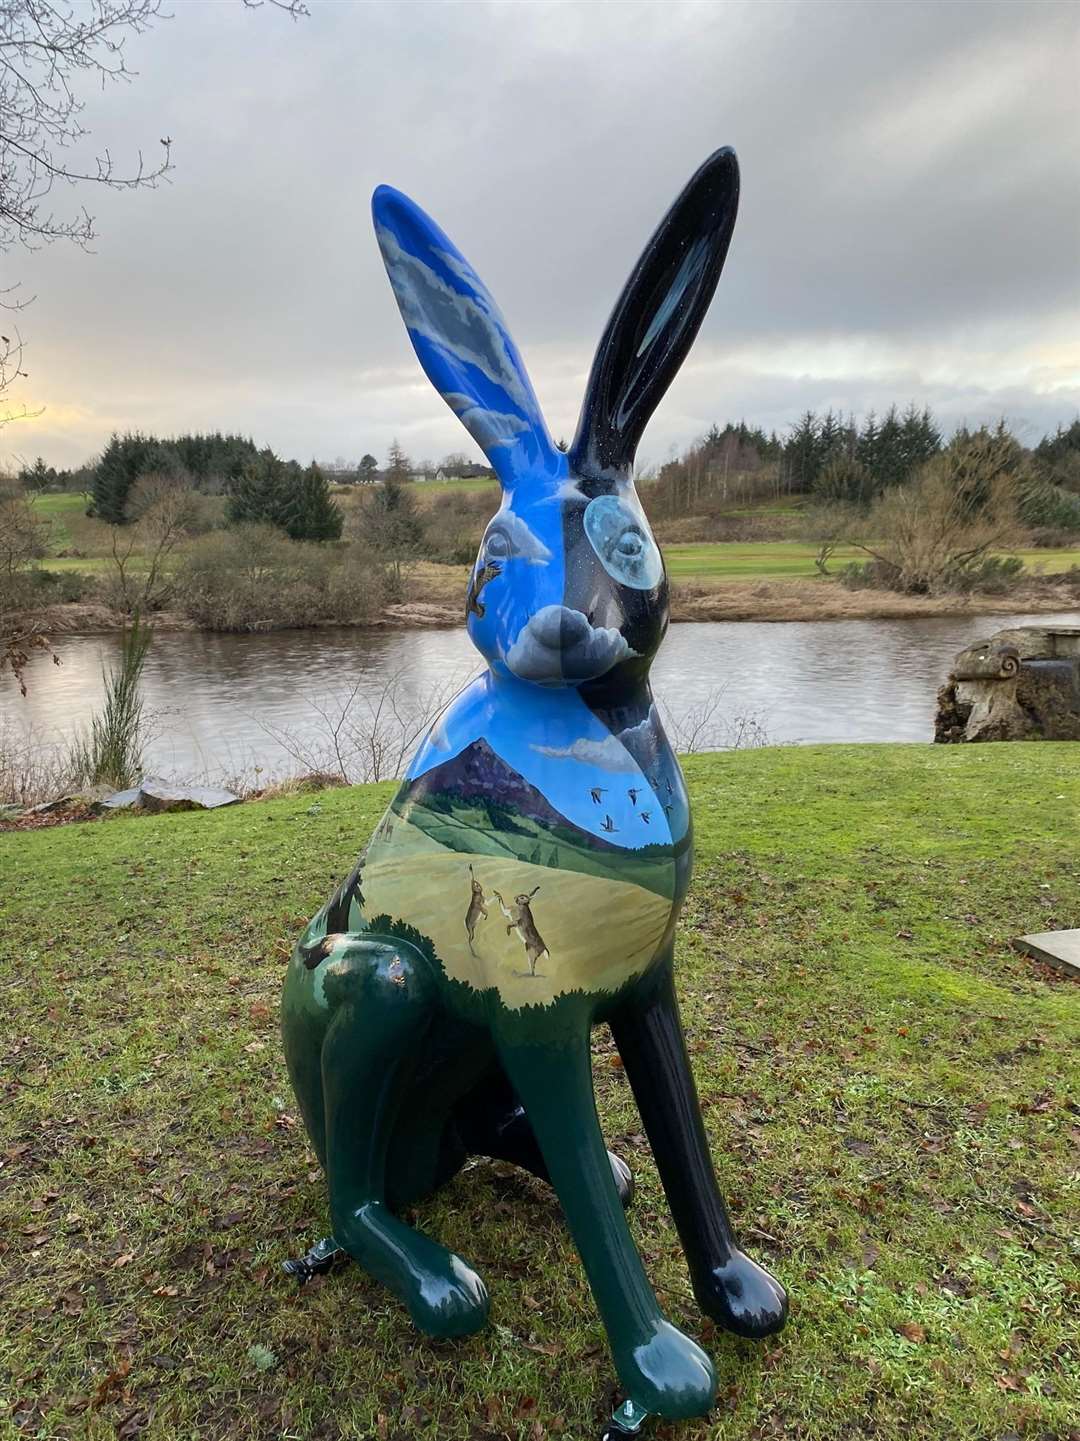 Bryan Angus painted the first hare sculpture that has been revealed.